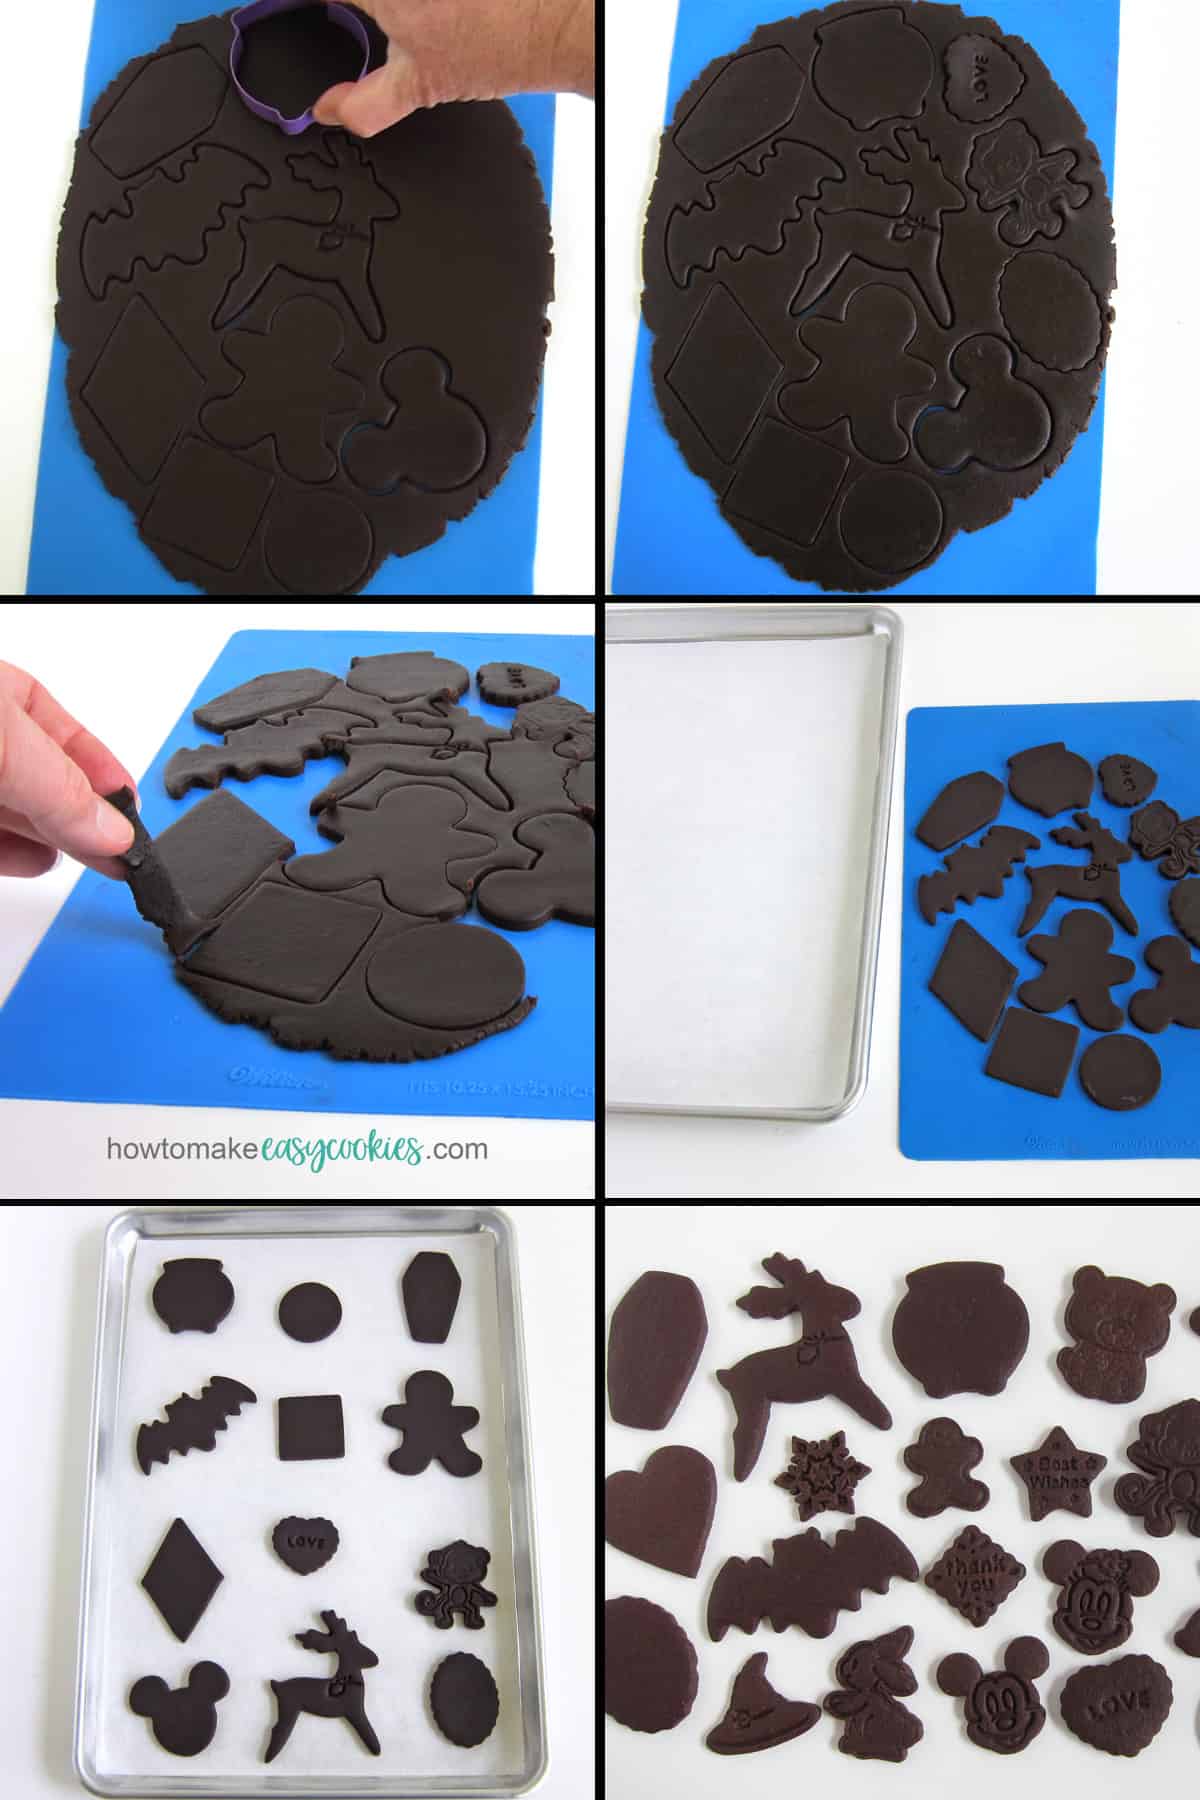 cut out chocolate cookie dough using cookie cutters, then bake on cookie sheets